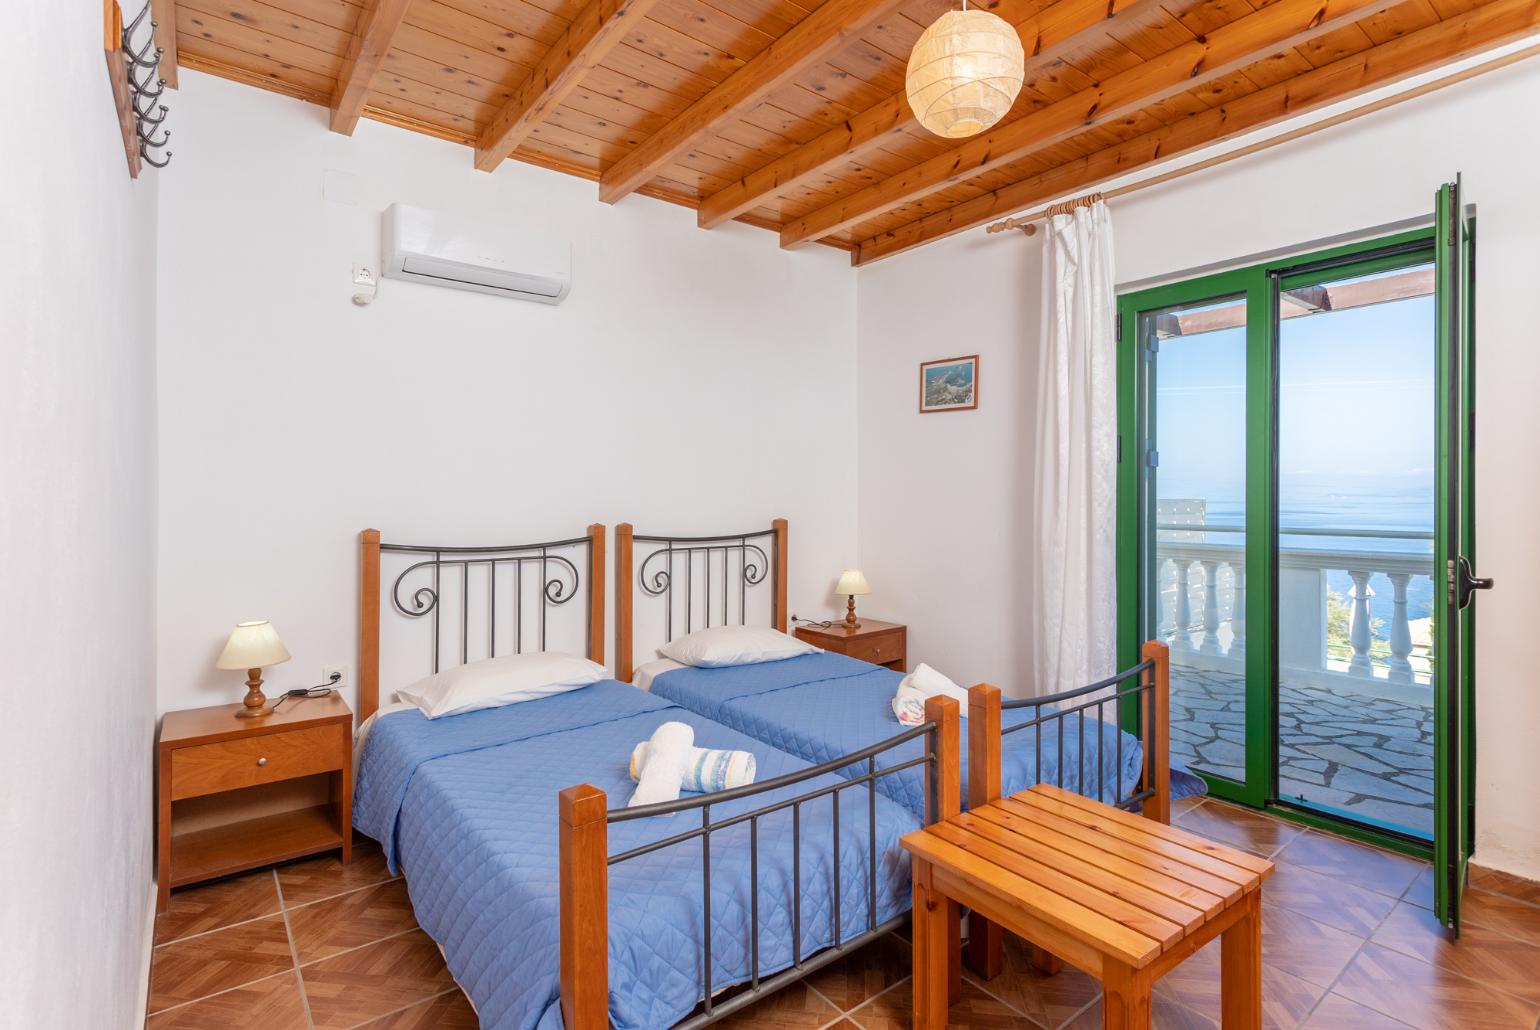 Twin bedroom with A/C, sea views, and terrace access